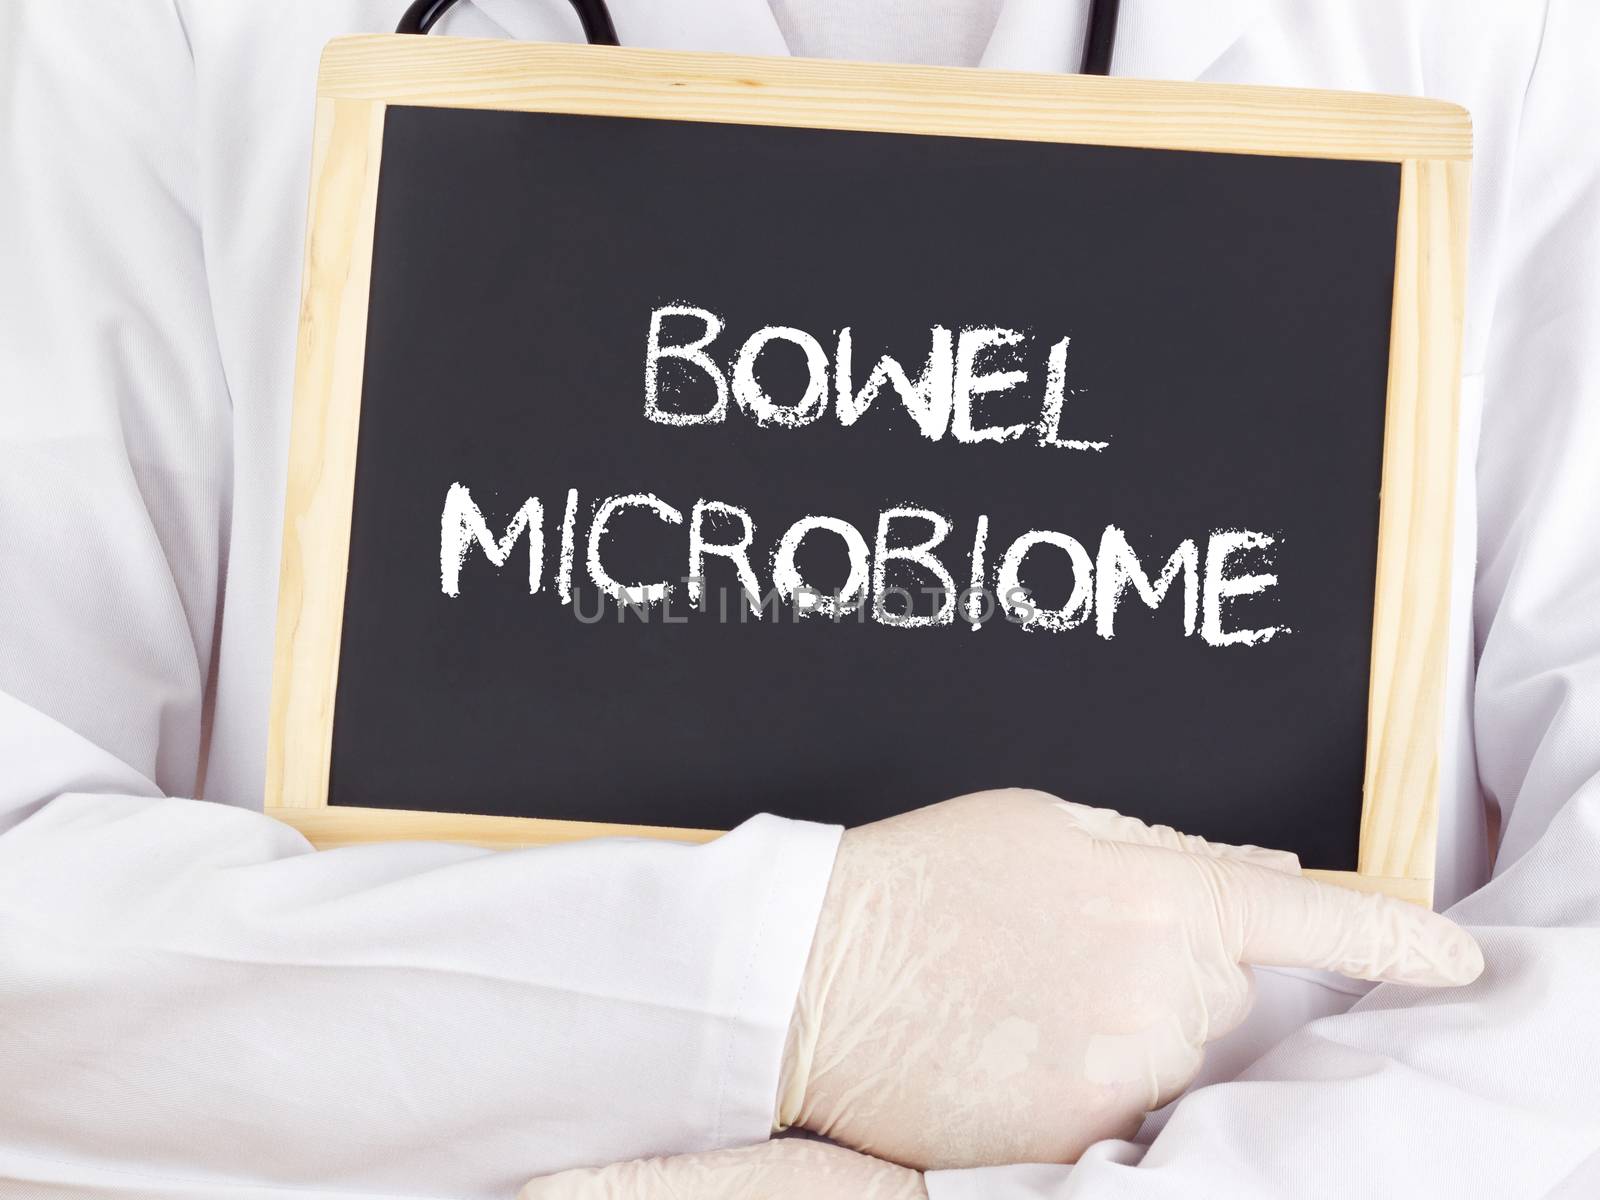 Doctor shows information: bowel microbiome by gwolters